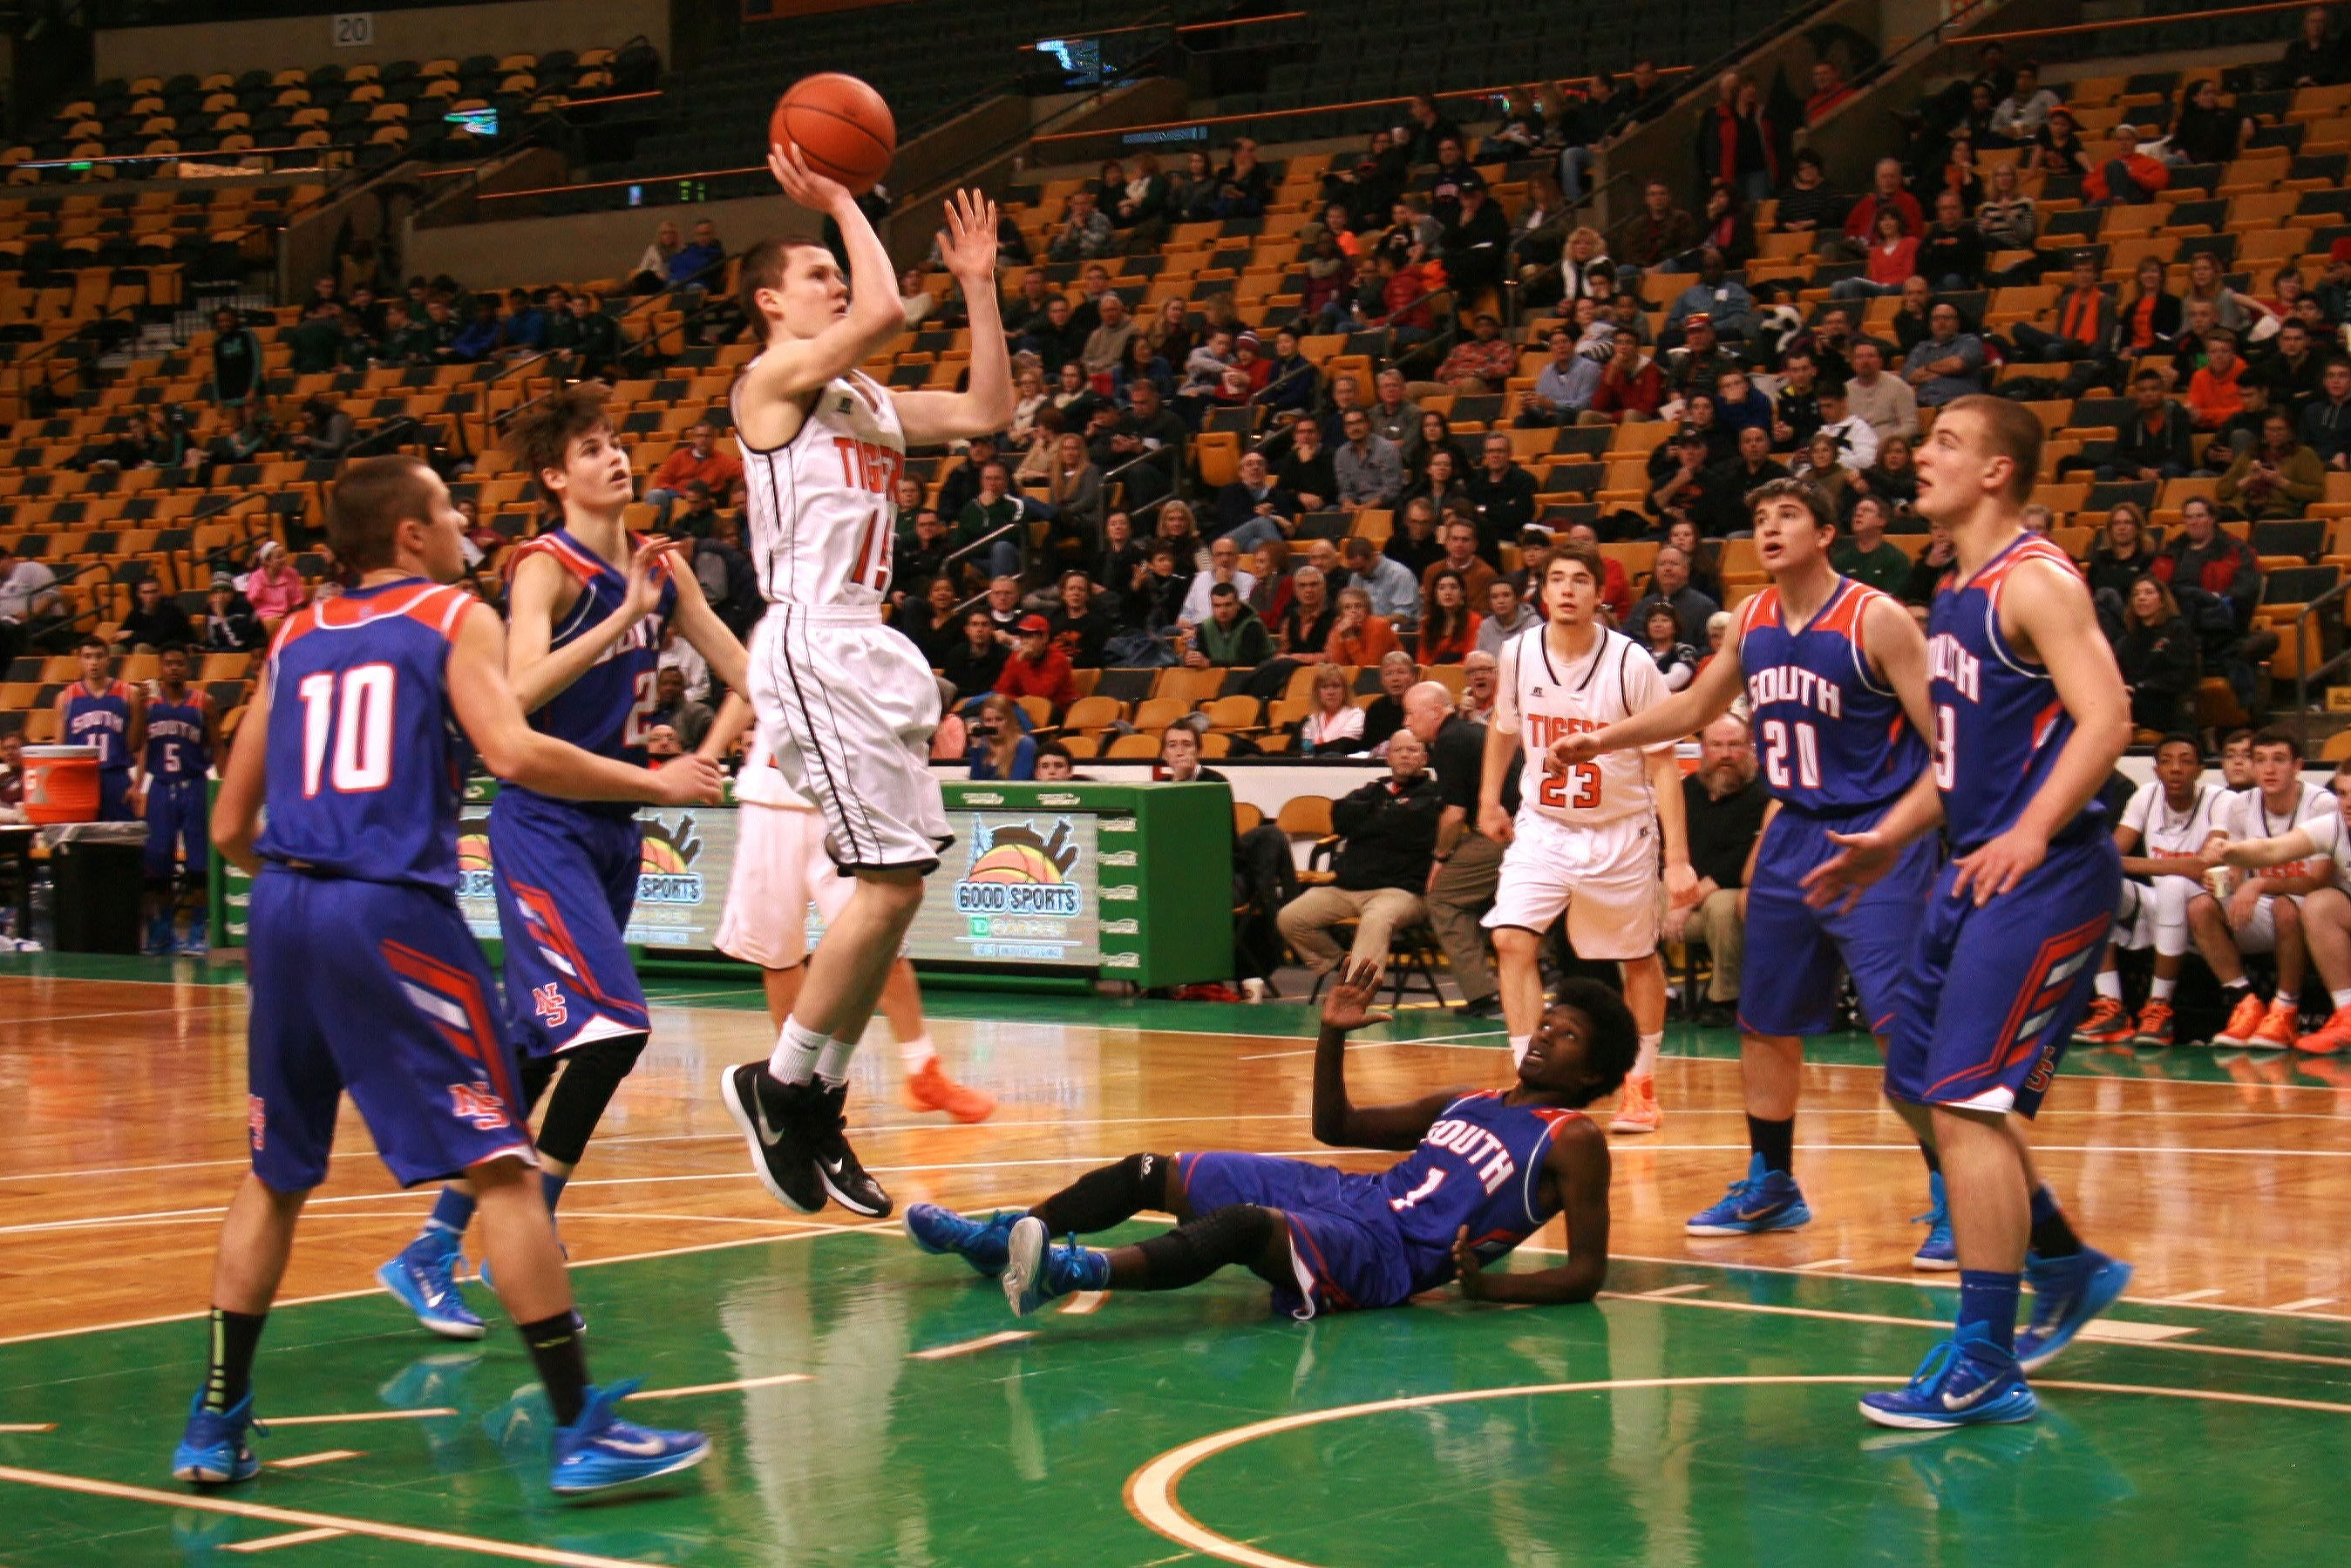 Freshman Ethan Wright drives for a basket last Saturday at the TD Garden in a 61-46 win over South.